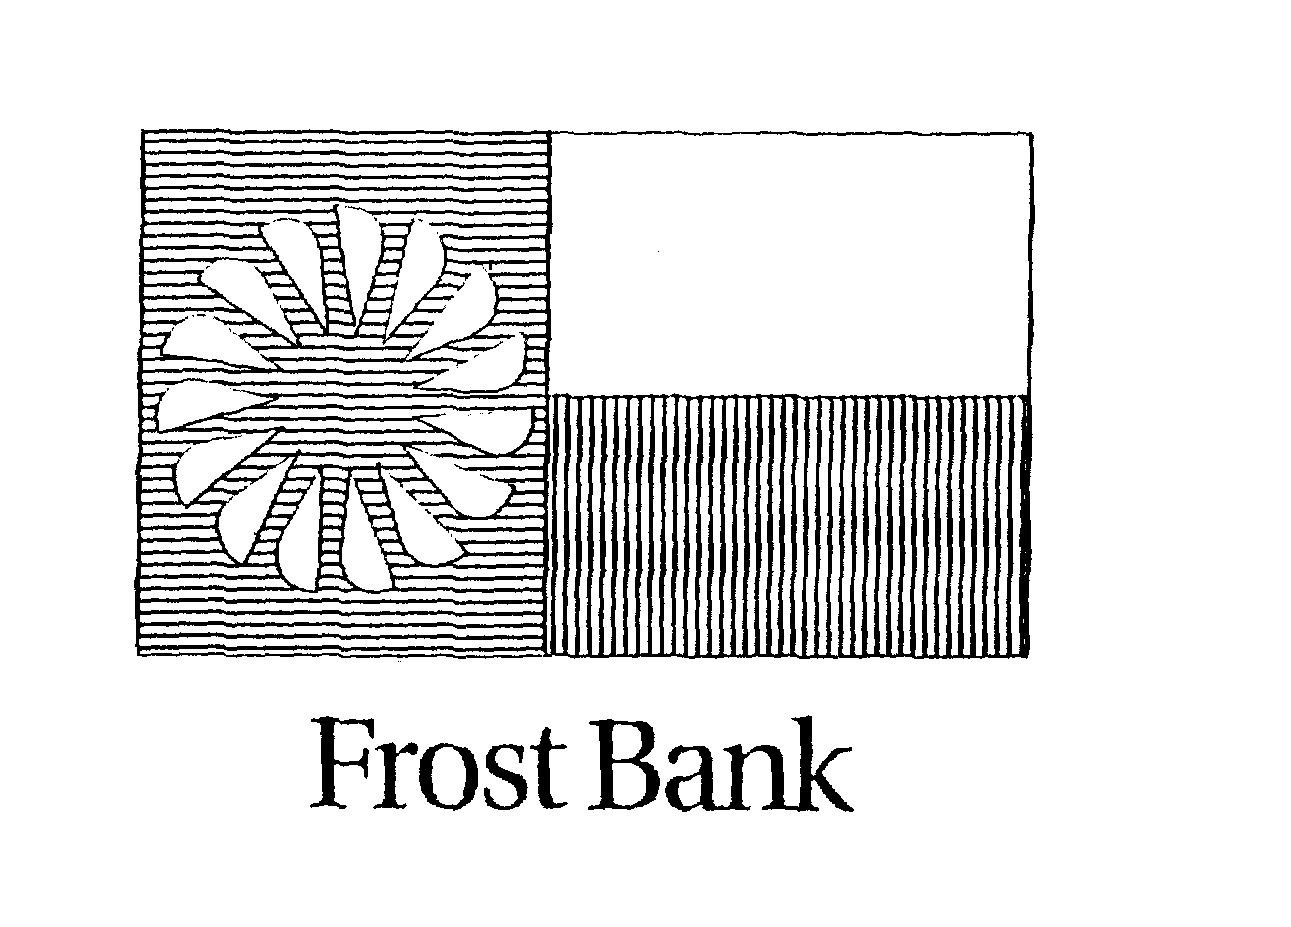  FROST BANK